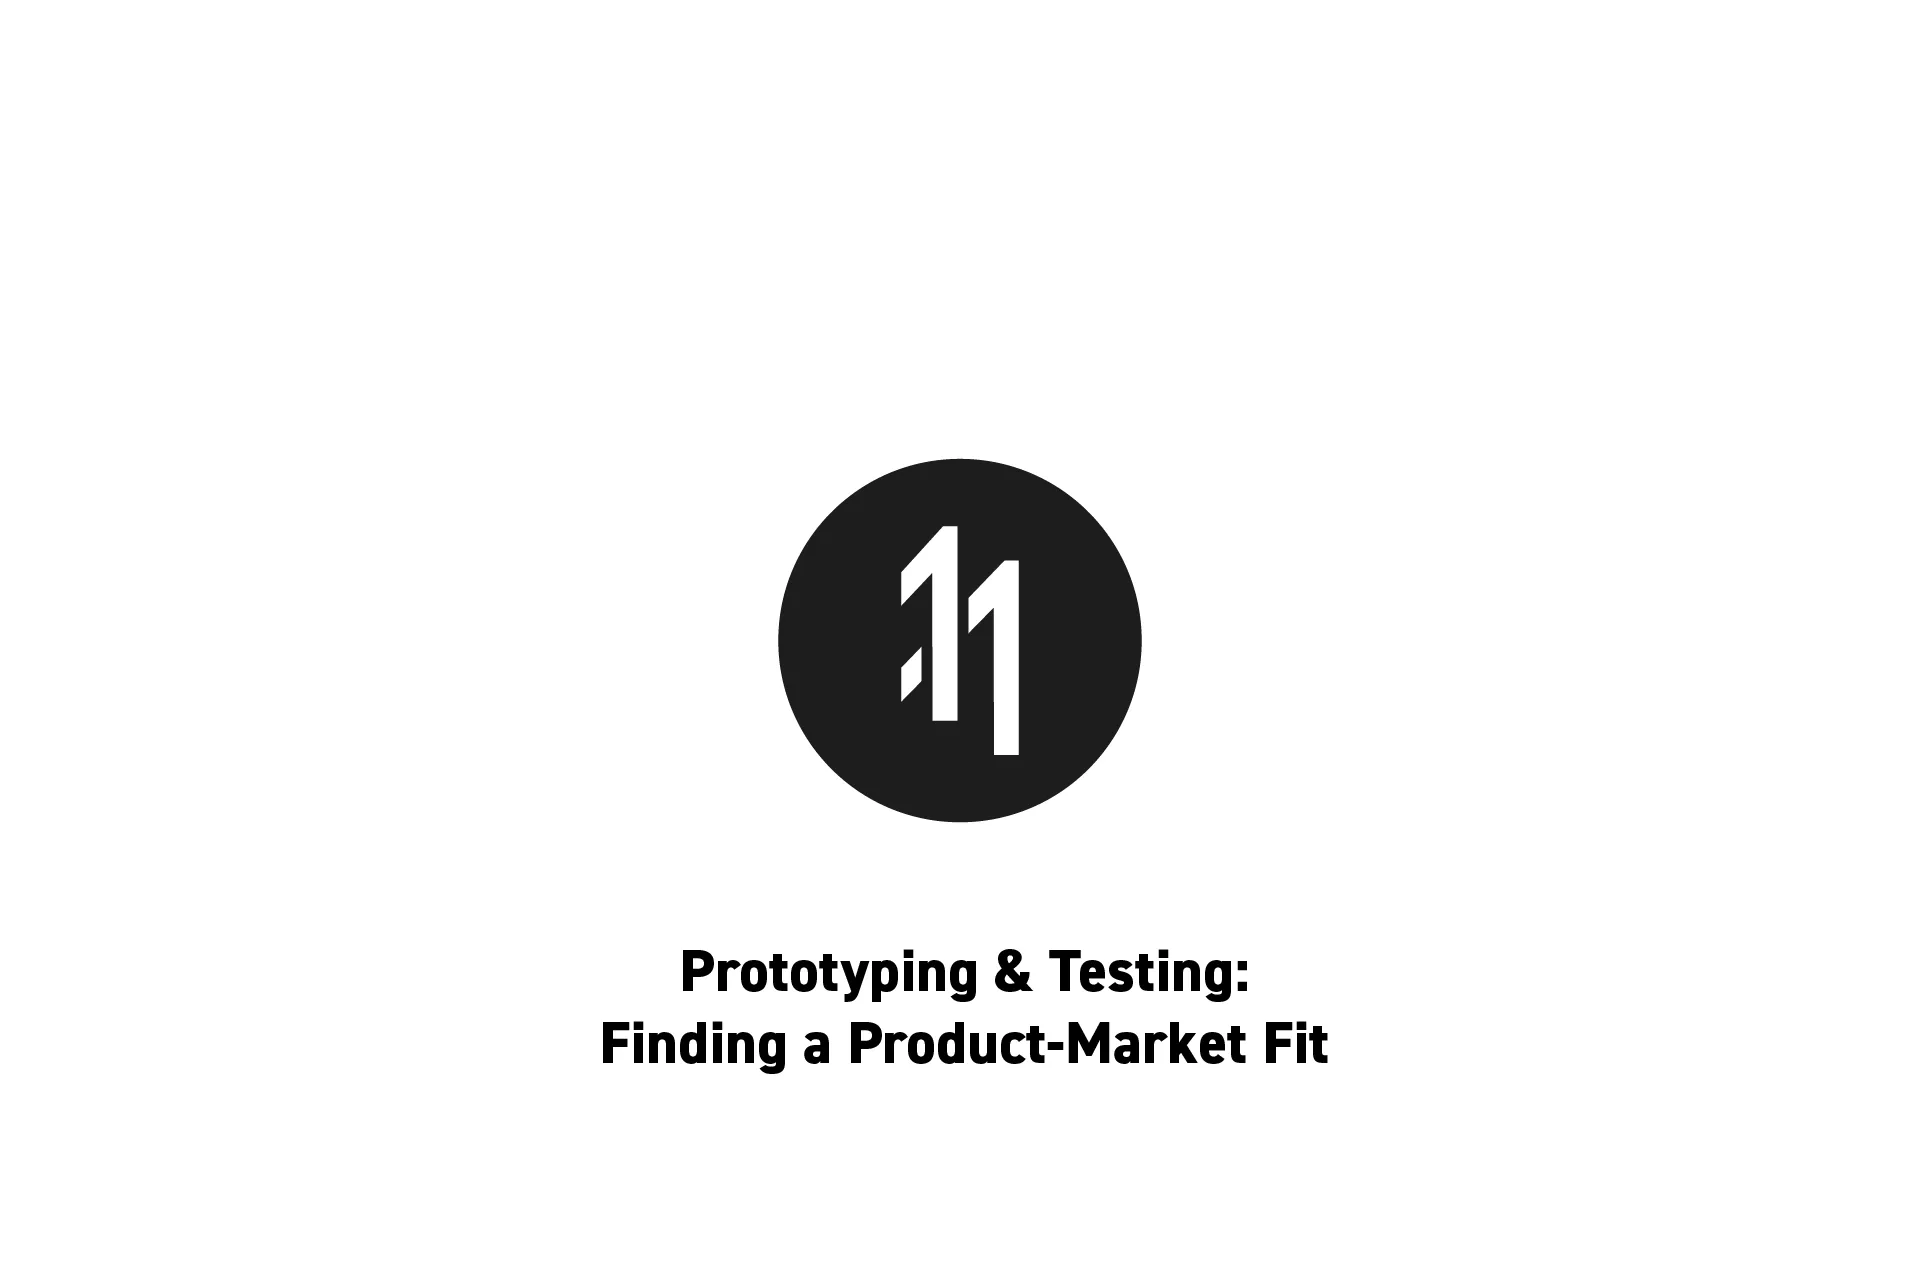 <p>The delasign logo with the text "Prototyping &amp; Testing: Finding a Product-Market Fit" beneath it.</p>